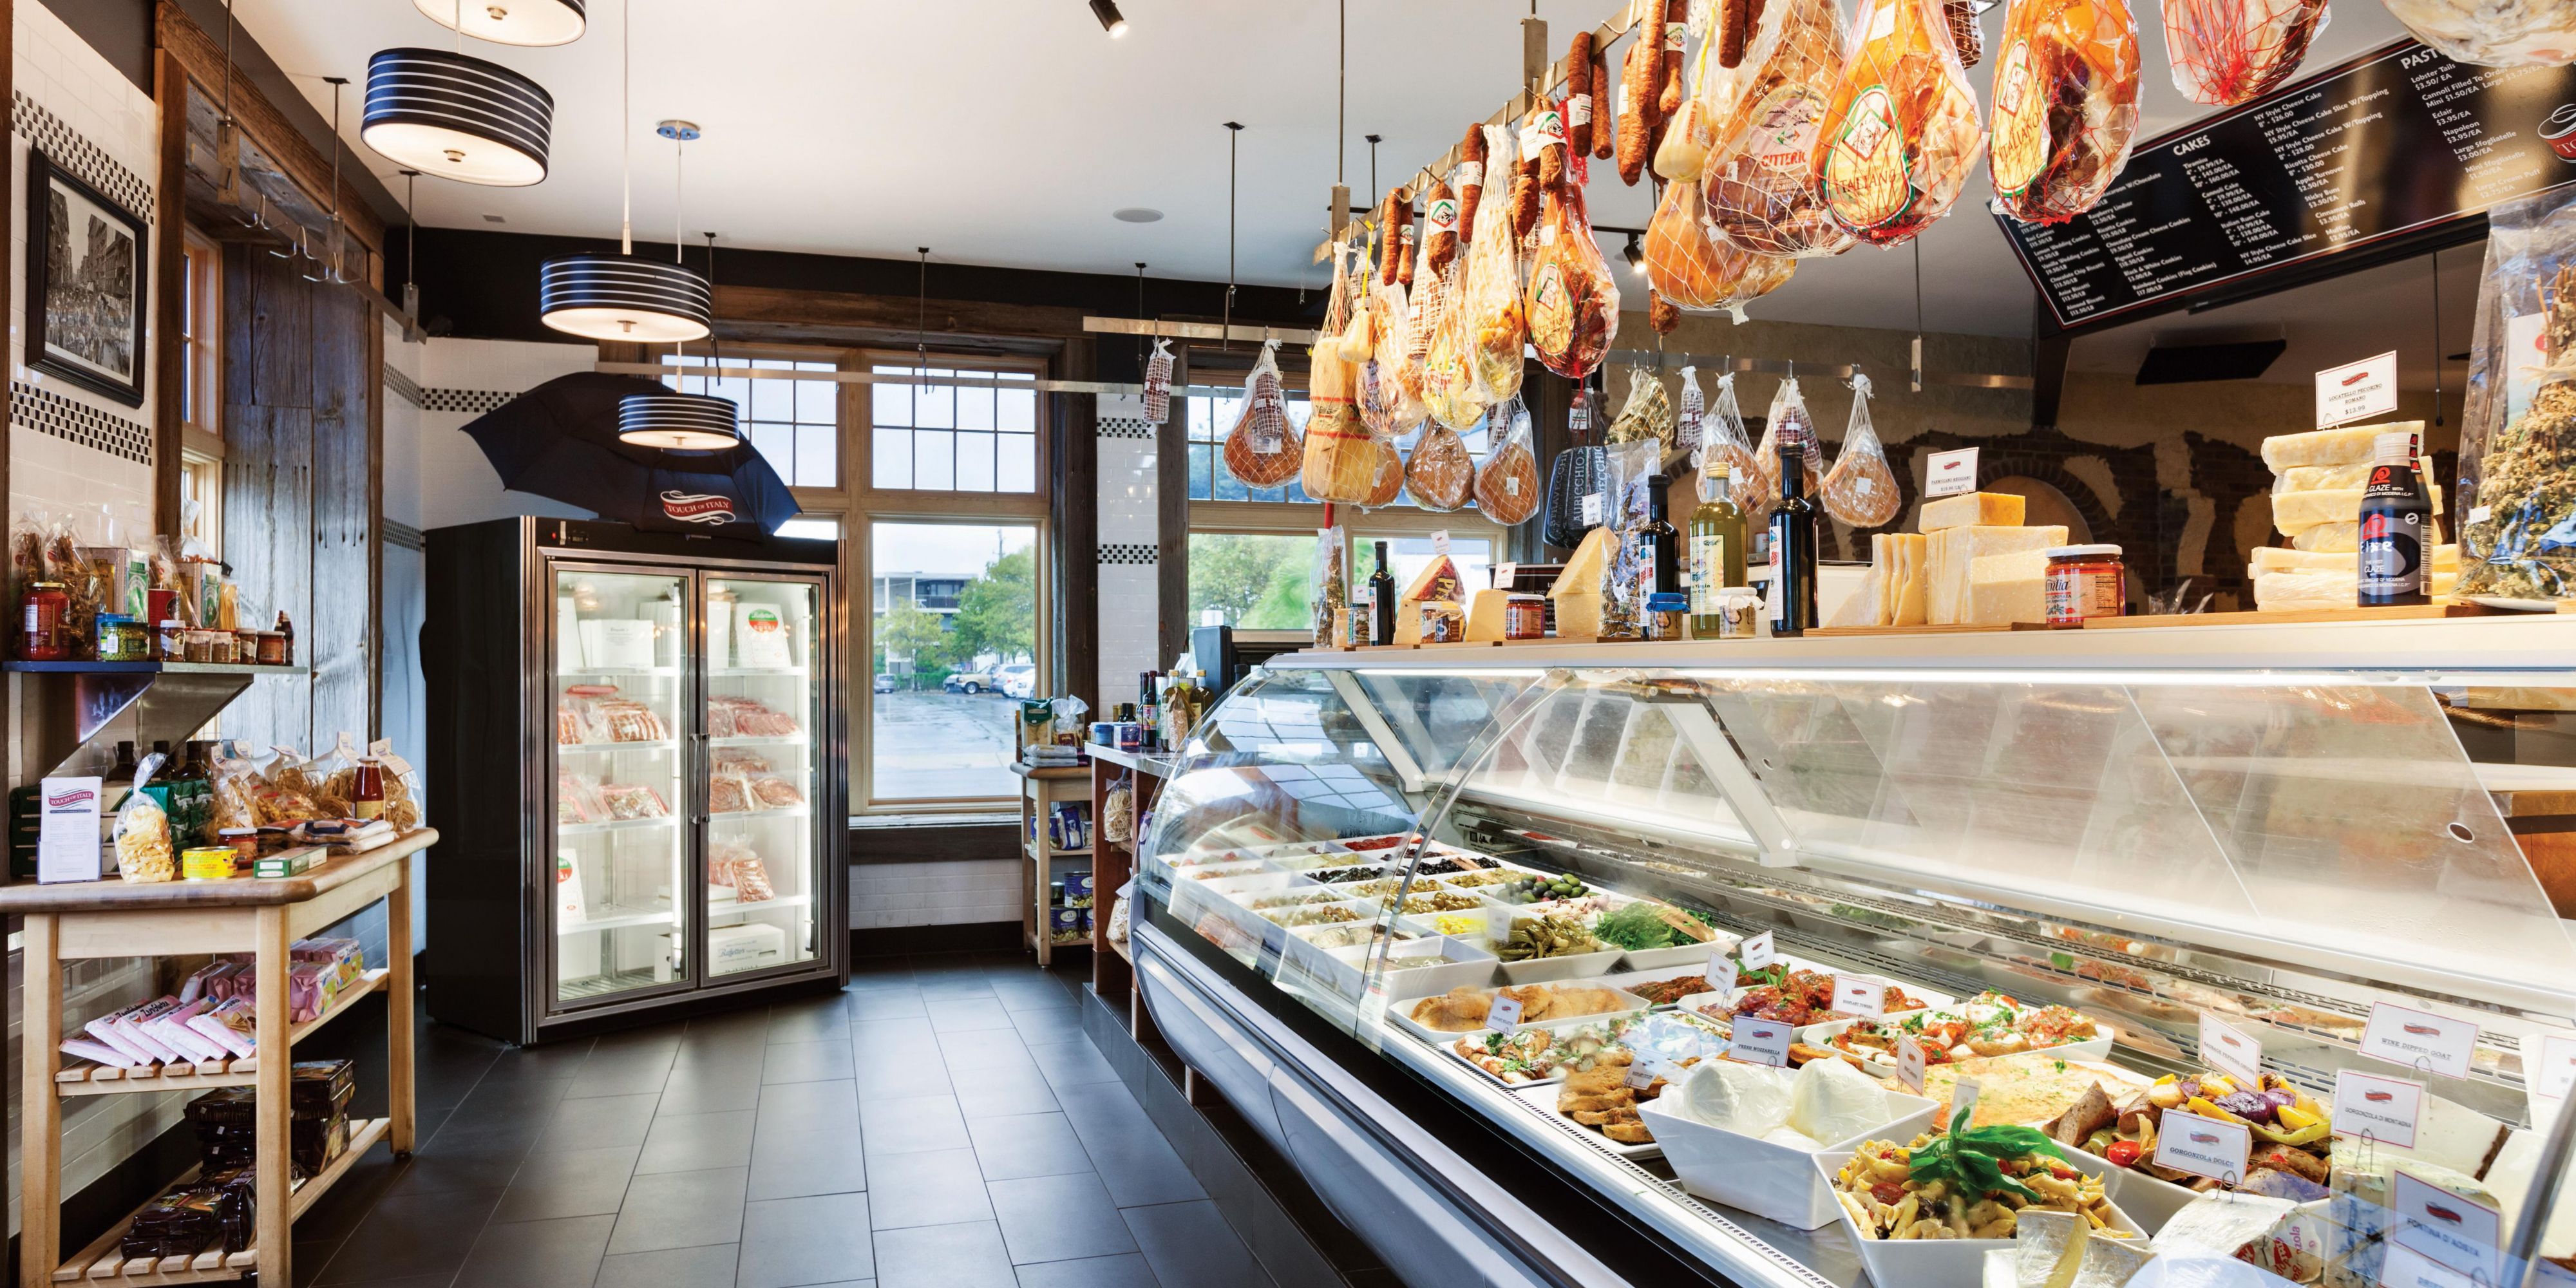 Touch of Italy's full service deli. Meats, cheeses and other items